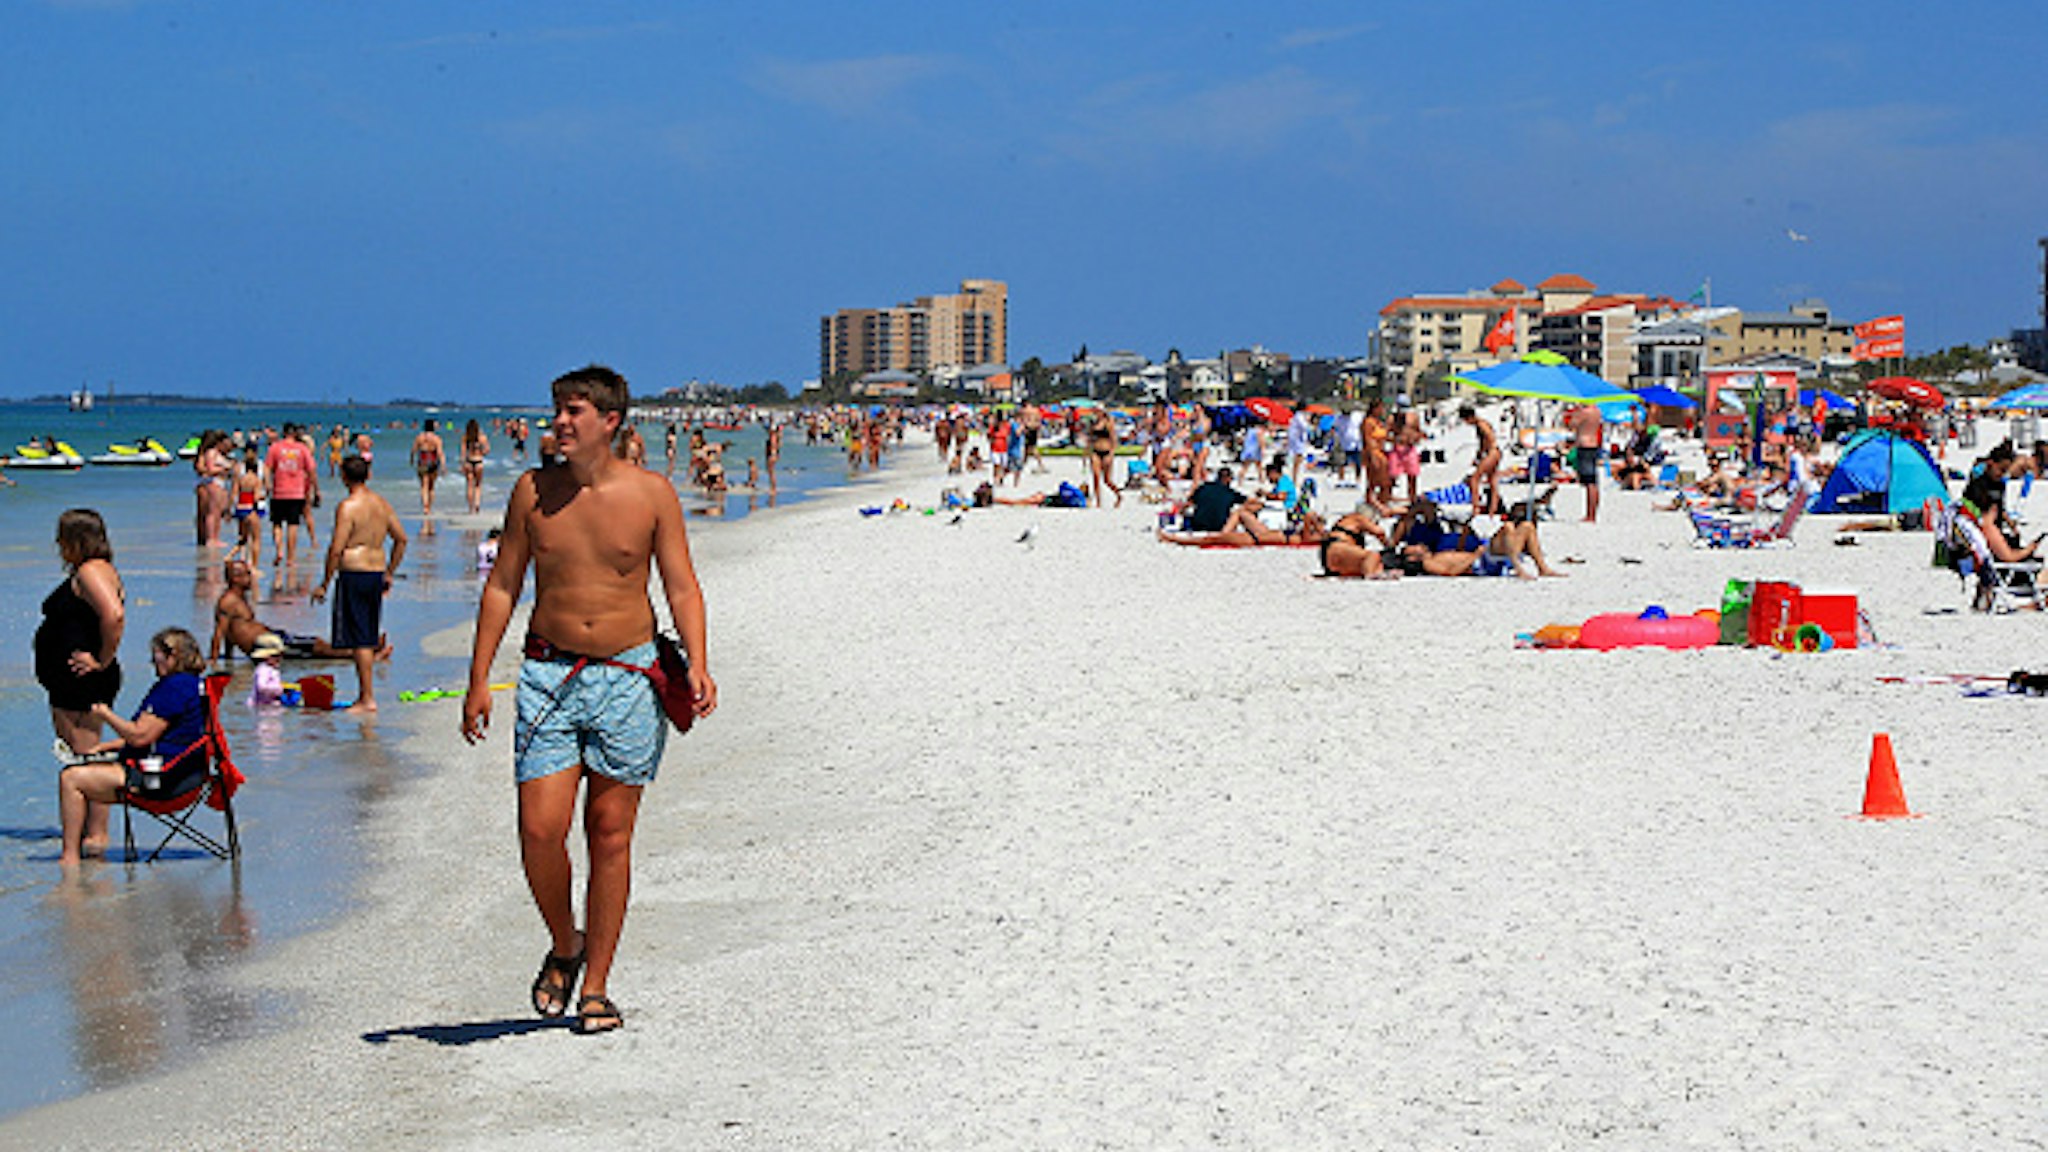 CLEARWATER, FL - MARCH 18: People gather on Clearwater Beach during spring break despite world health officials' warnings to avoid large groups on March 18, 2020 in Clearwater, Florida. The World Health Organization declared COVID-19 a global pandemic on March 11.